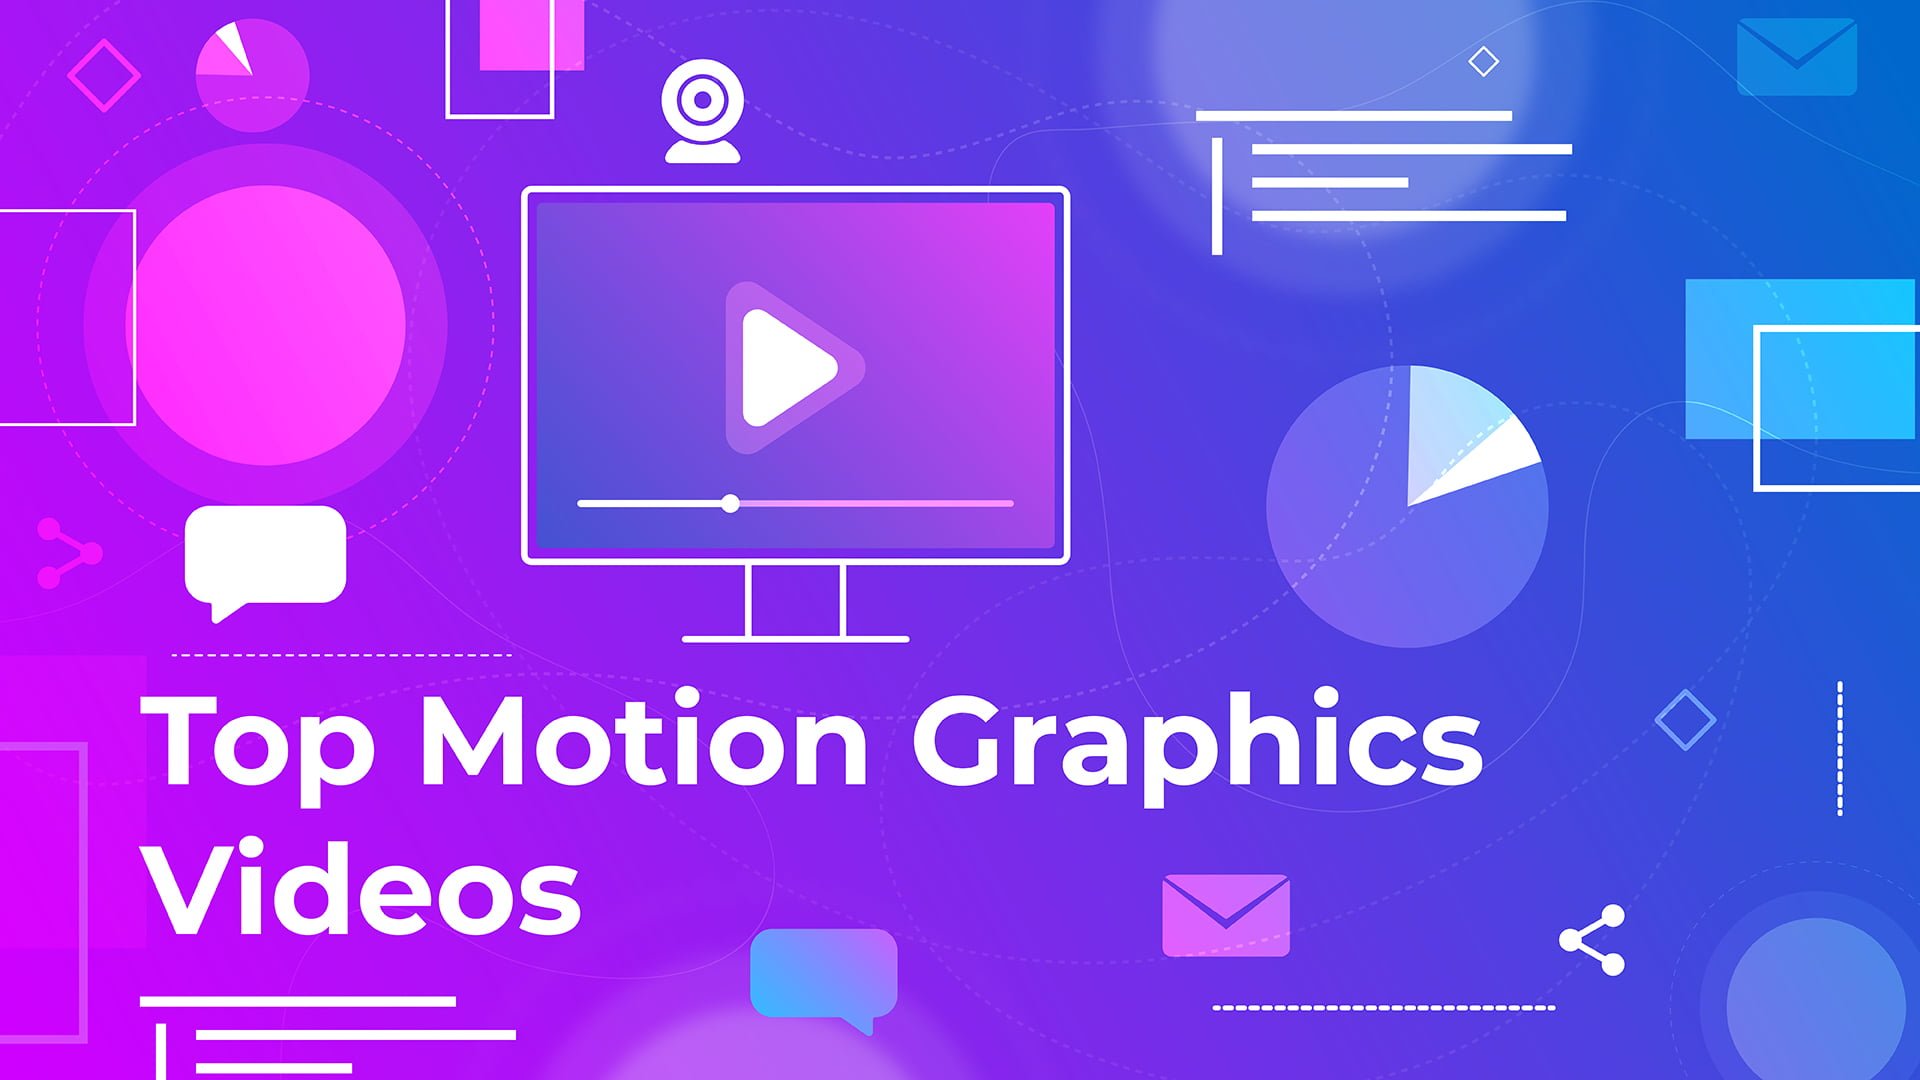 Top Motion Graphic Videos